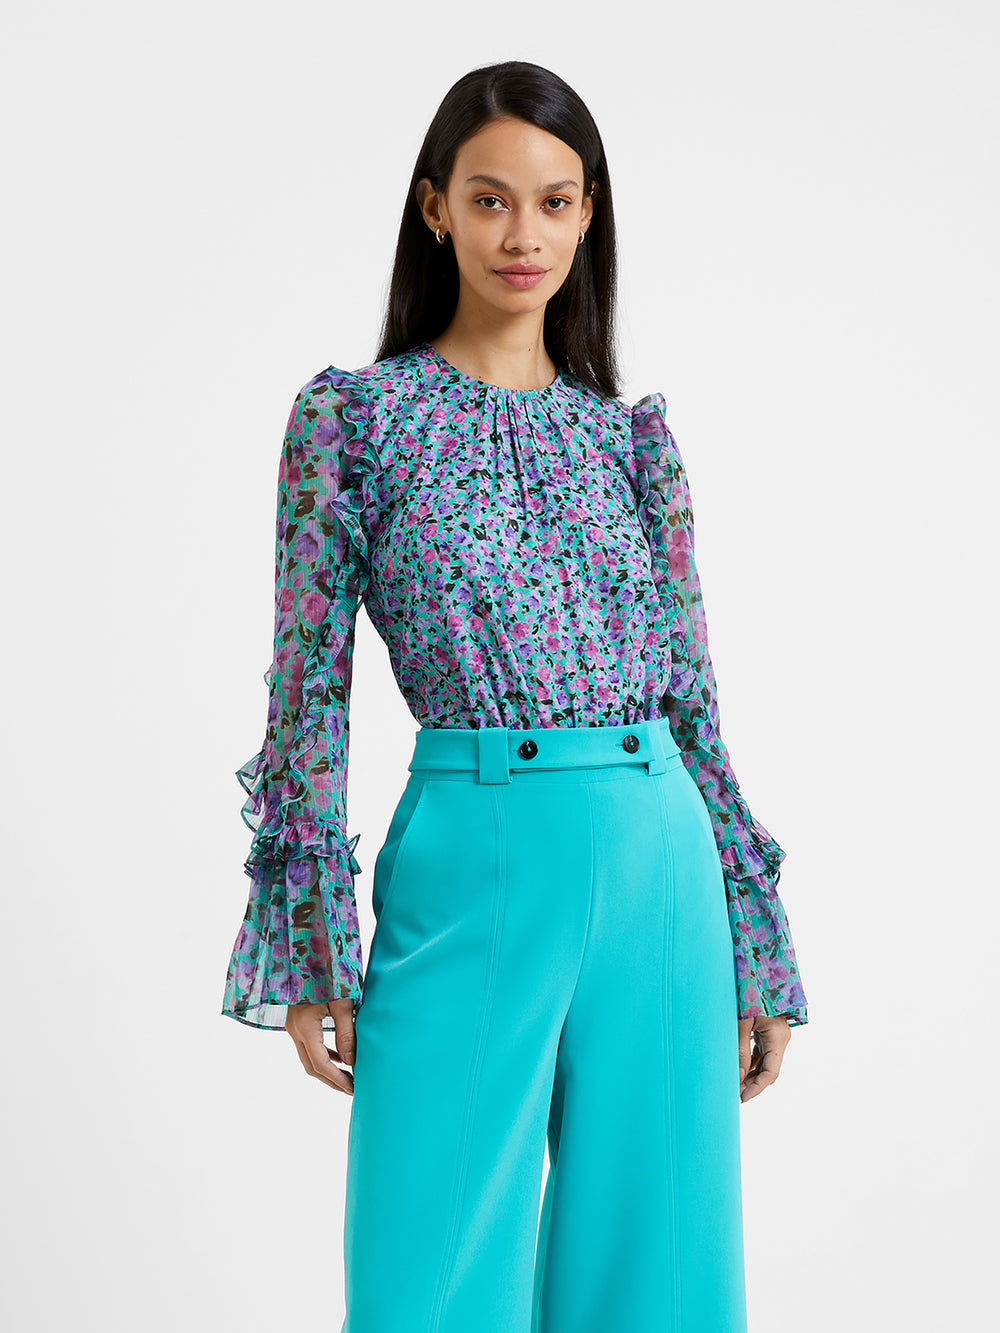 Alezzia Ely Jacquard Mix Top Jaded Teal | French Connection UK